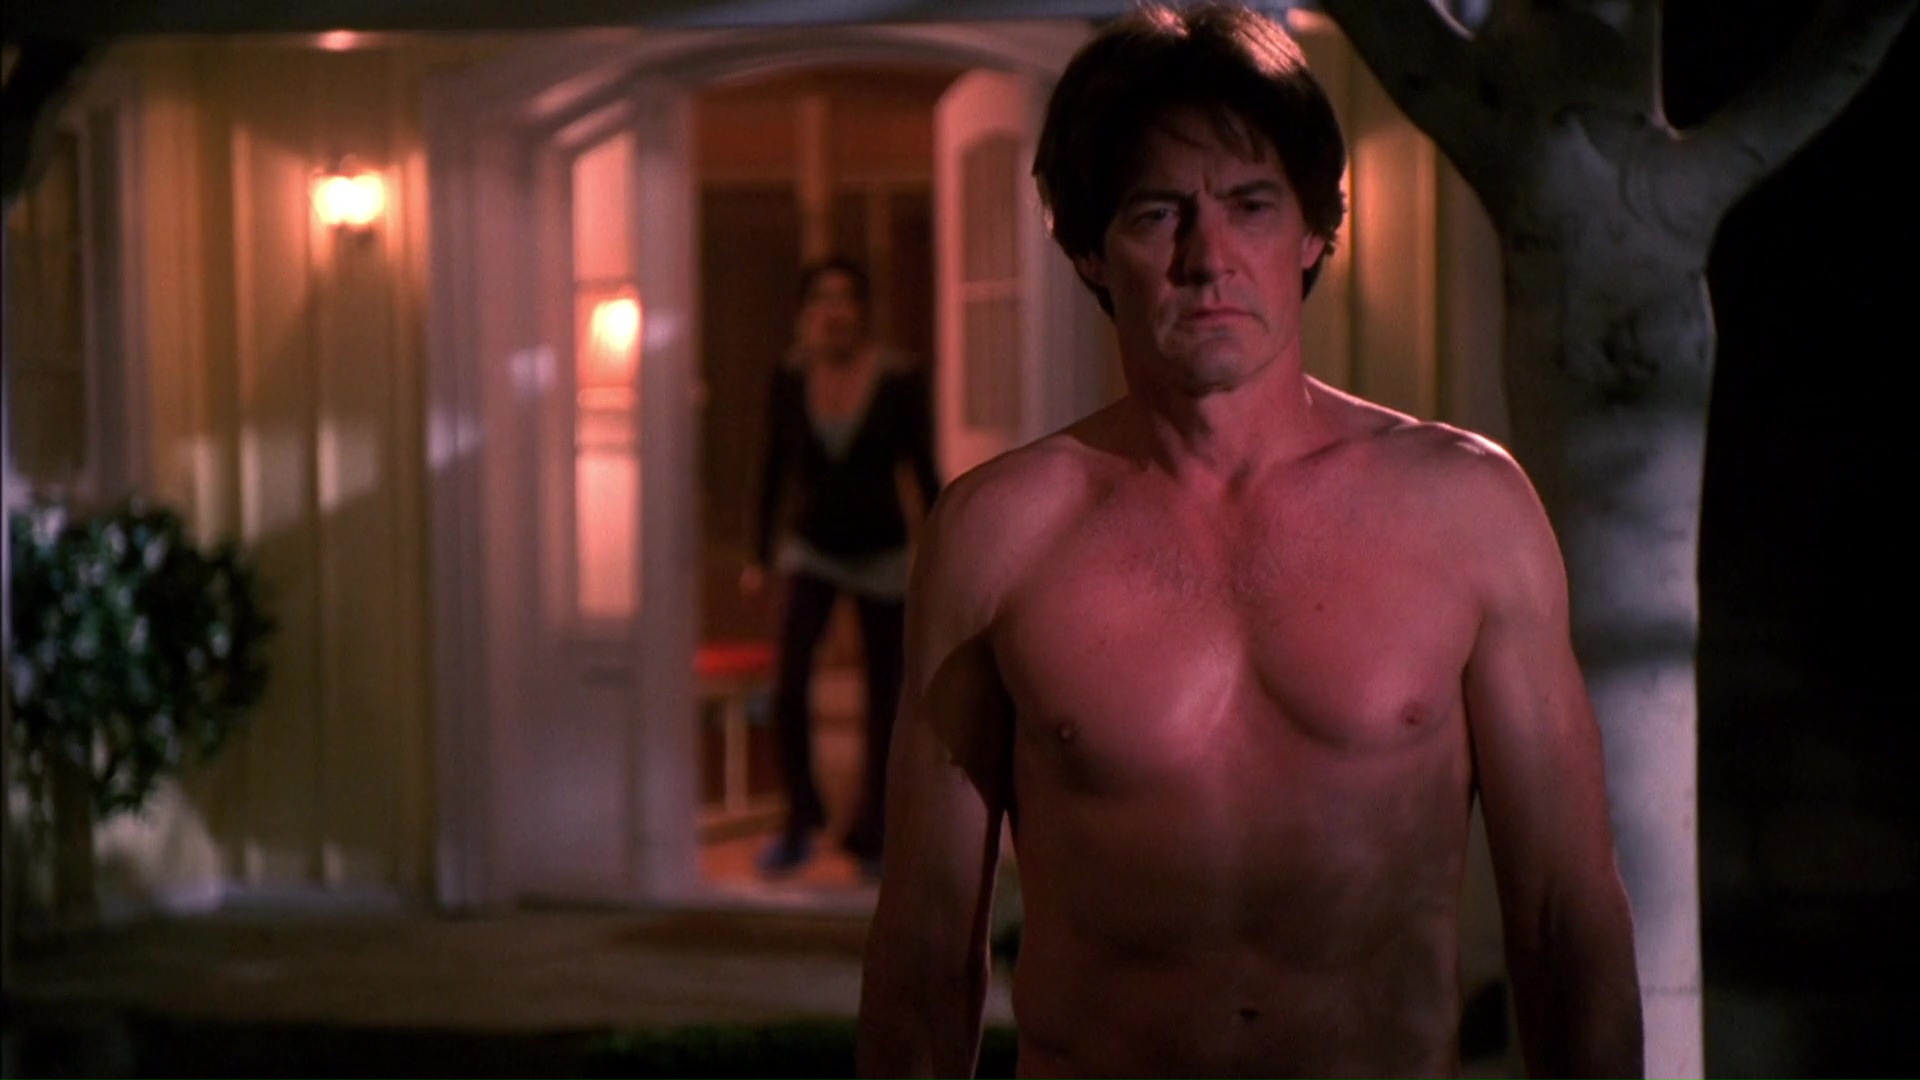 Kyle MacLachlan shirtless in Desperate Housewives 4-12 "In Buddy'...